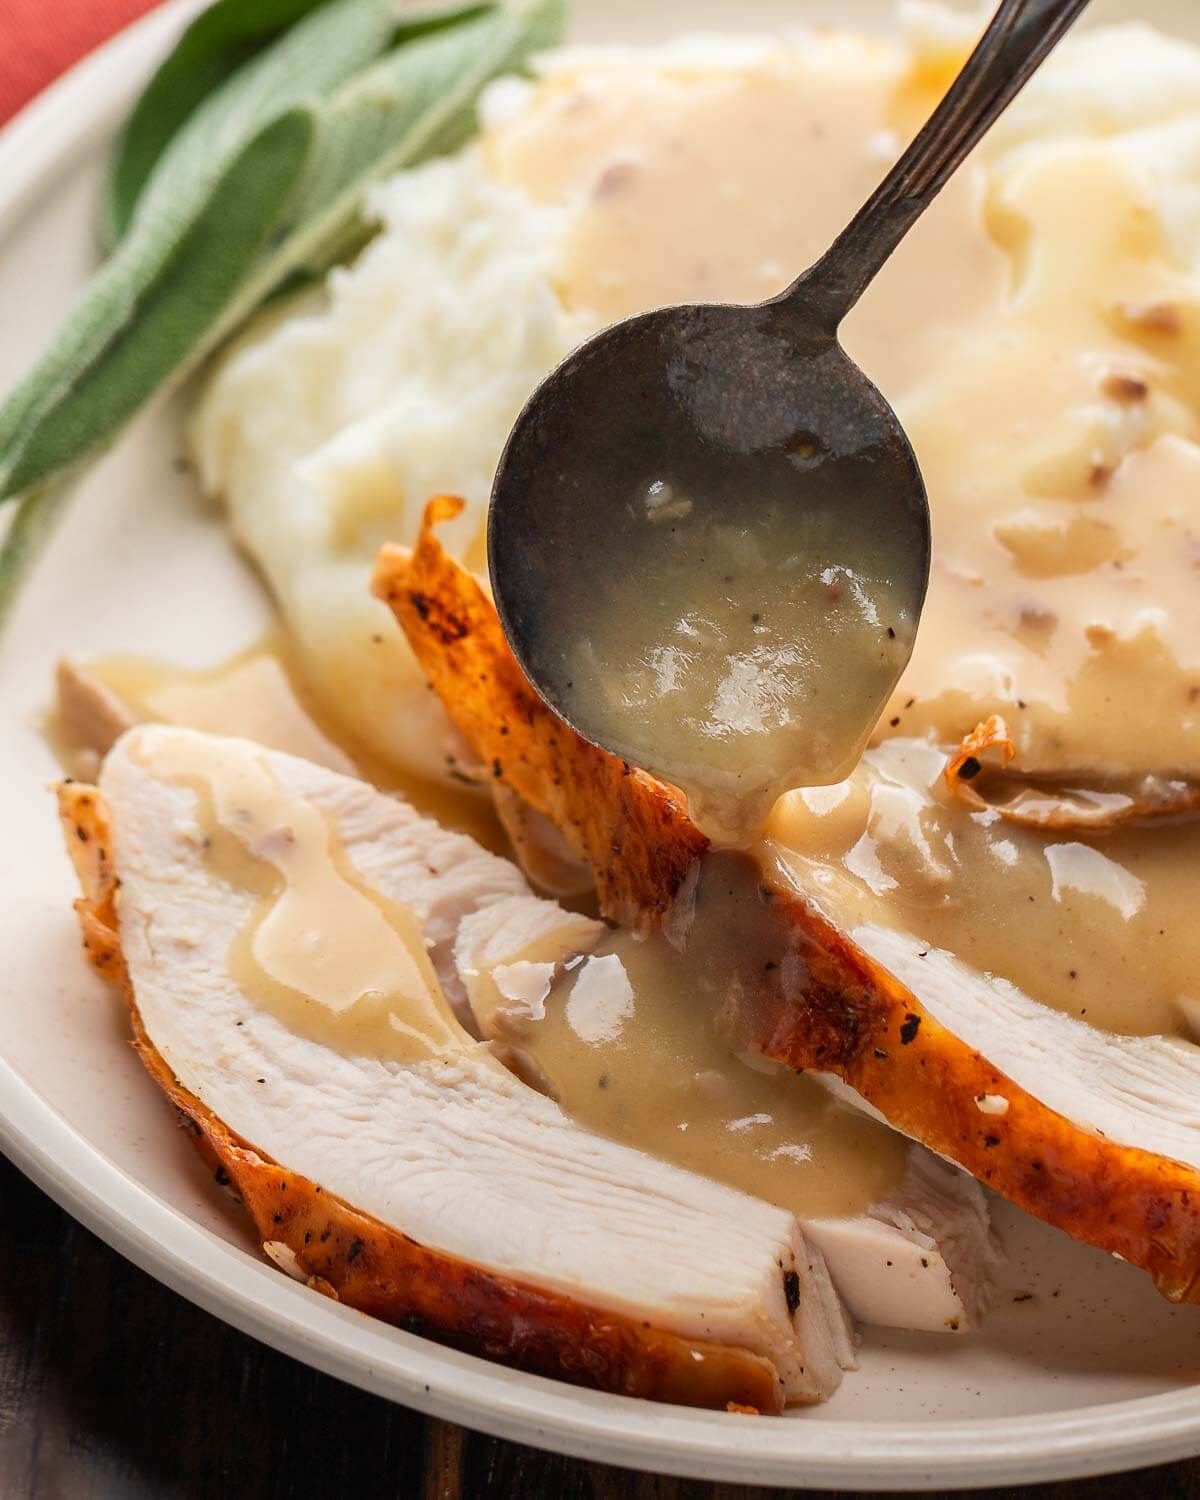 Giblet gravy ladled over turkey and mashed potatoes in white plate.